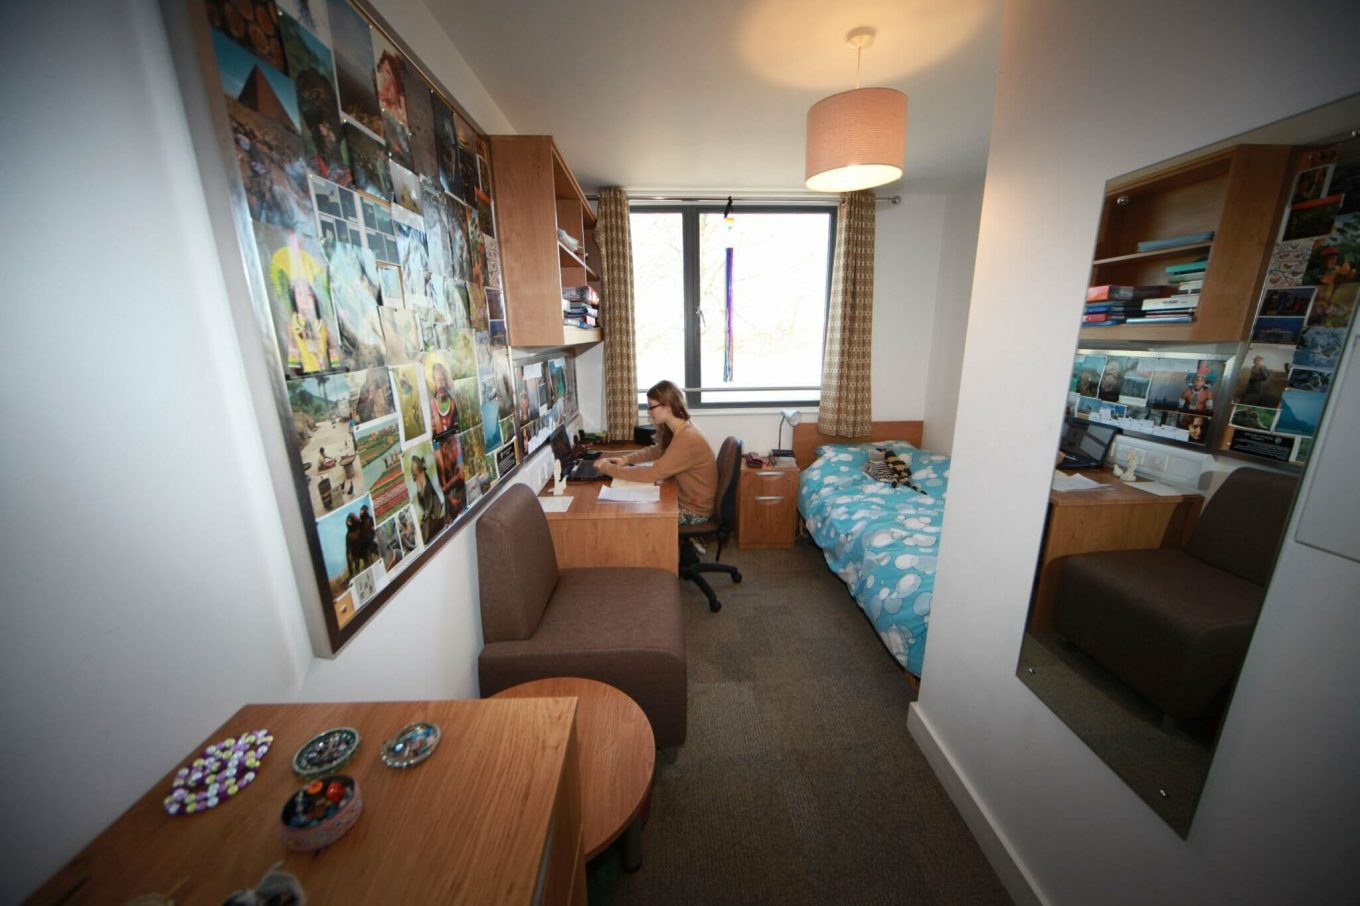 The 4 Rules of Sharing a Student Apartment